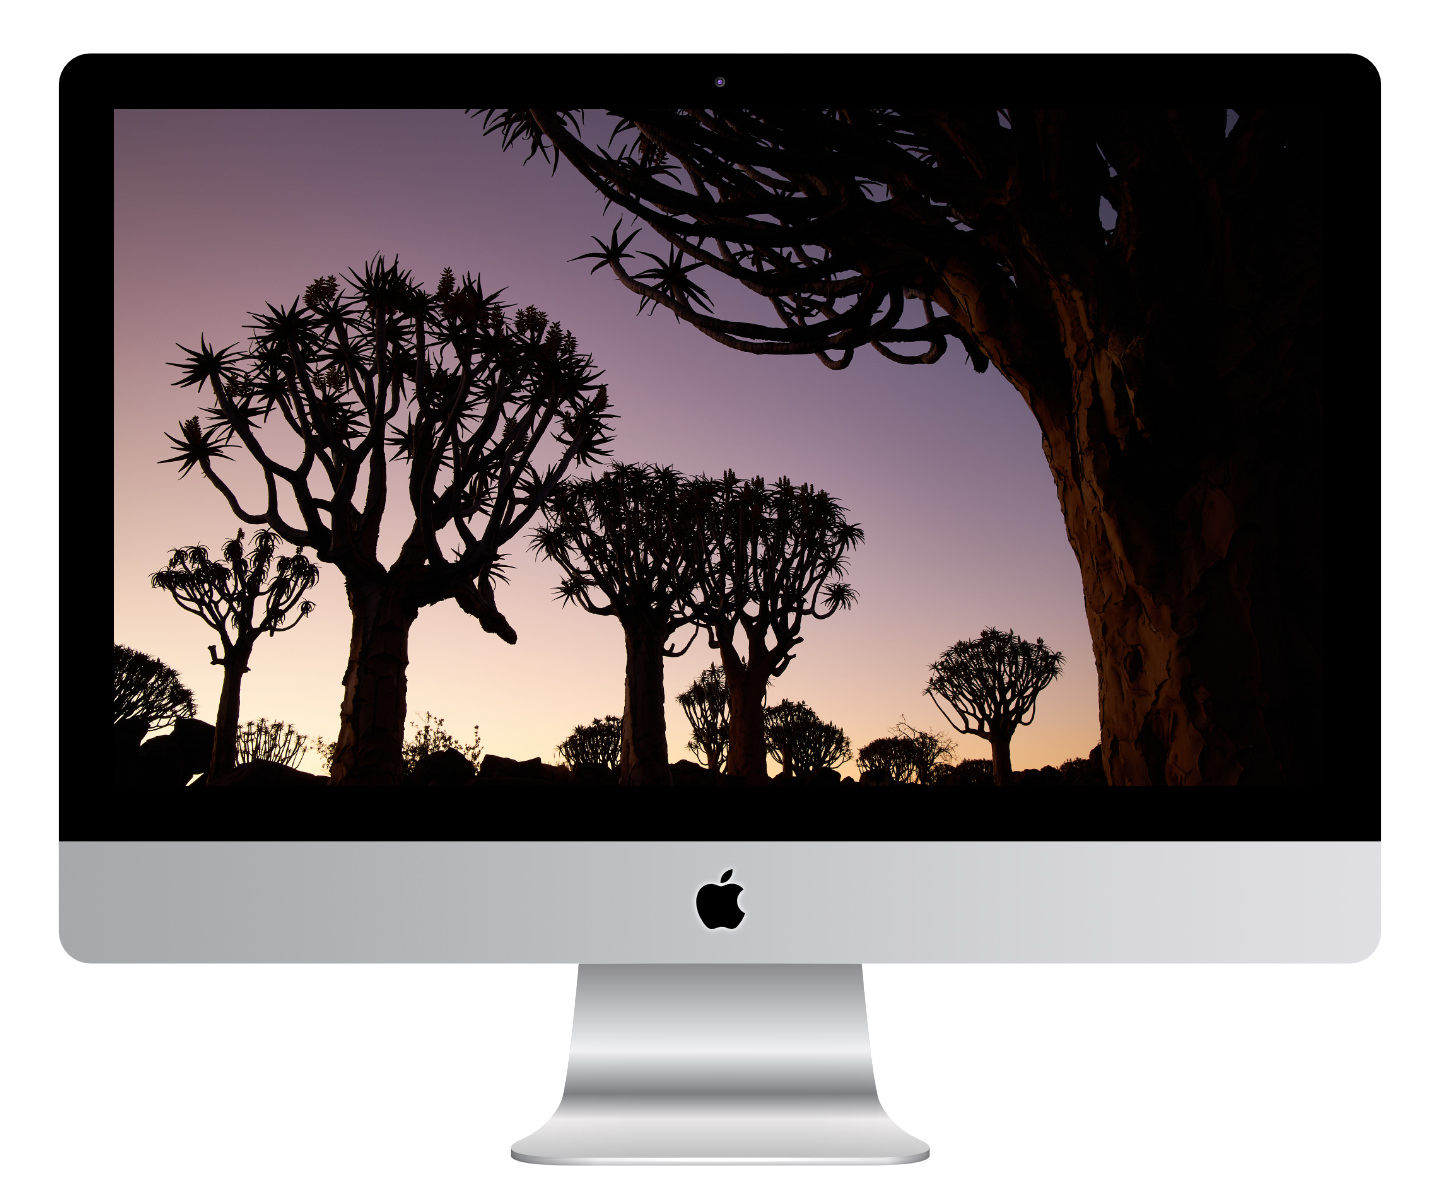 Quiver Tree Forest at Dusk Wallpaper